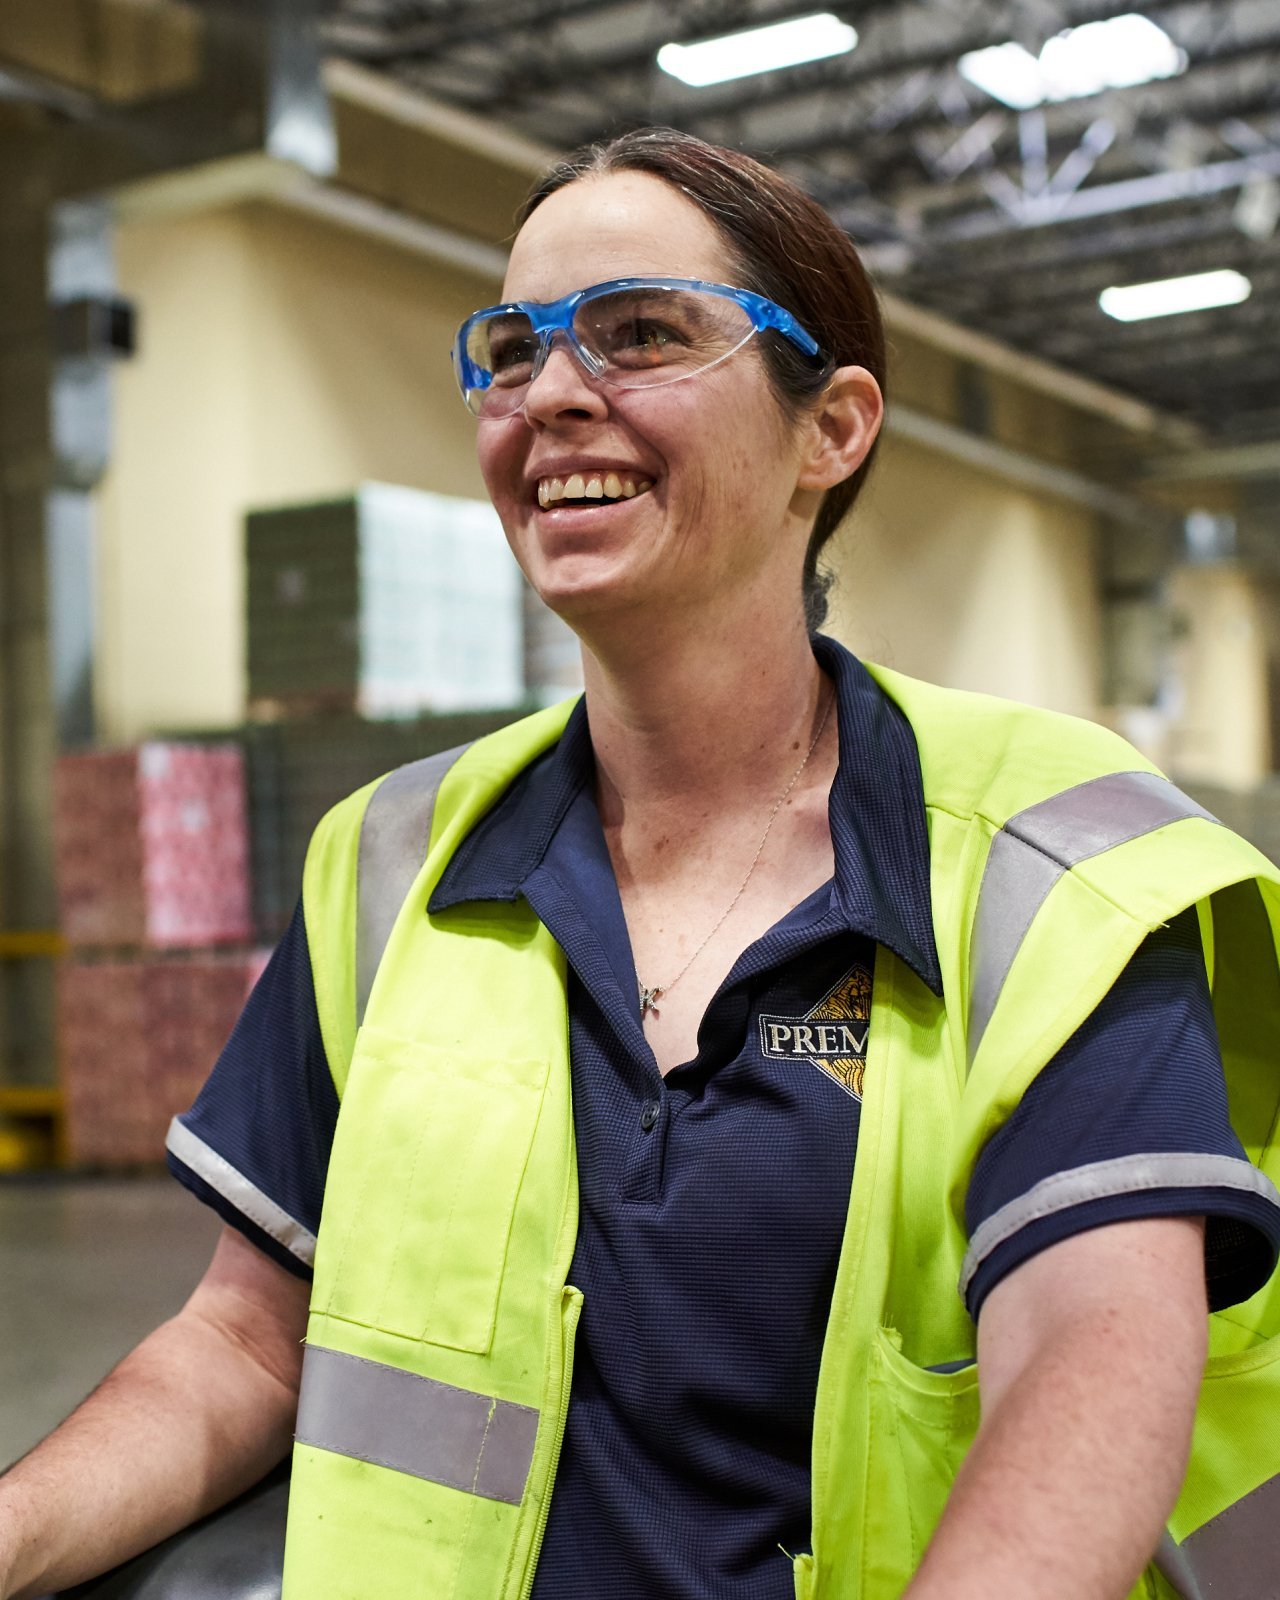 A woman with protective glasses, wearing a navy polo type shirt in a warehouse setting